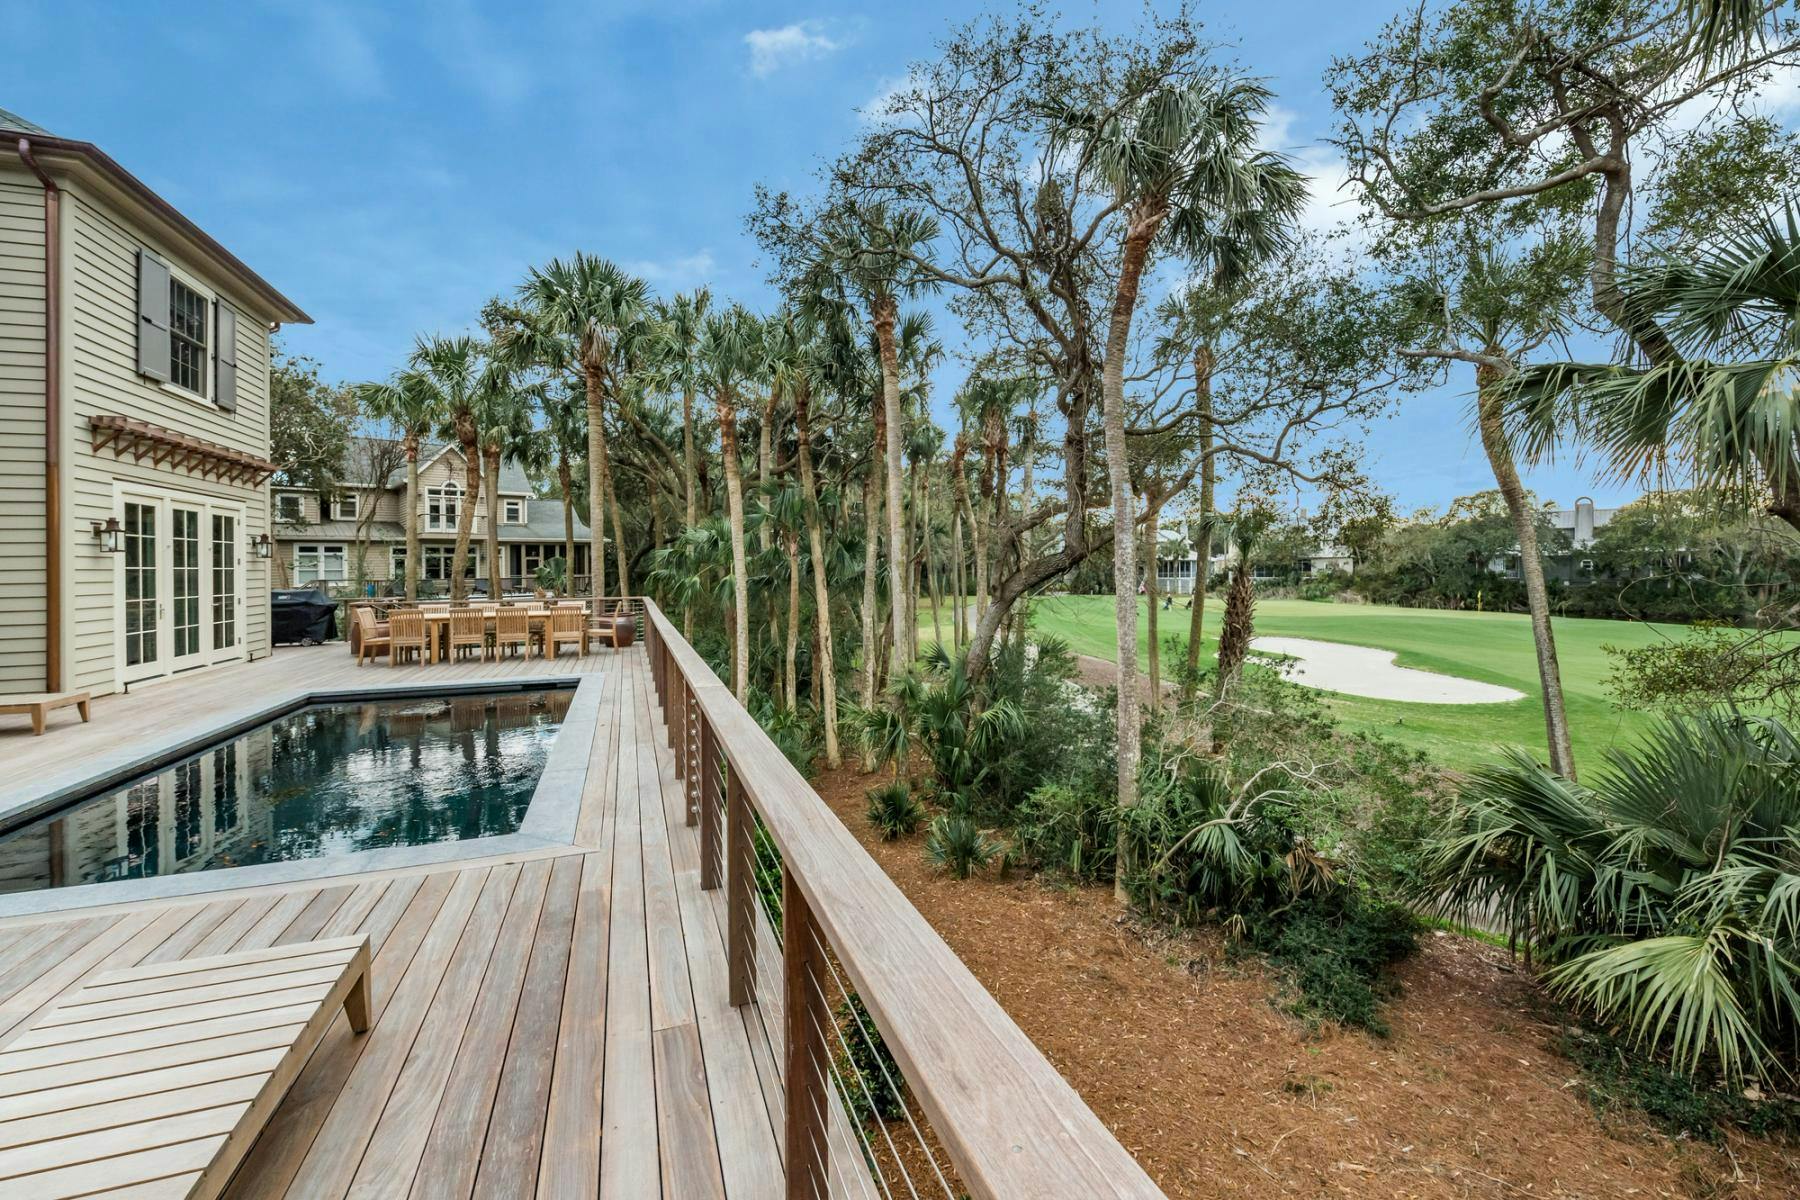 Outdoor living space overlooking the golf course at a Kiawah Island vacation rental home.